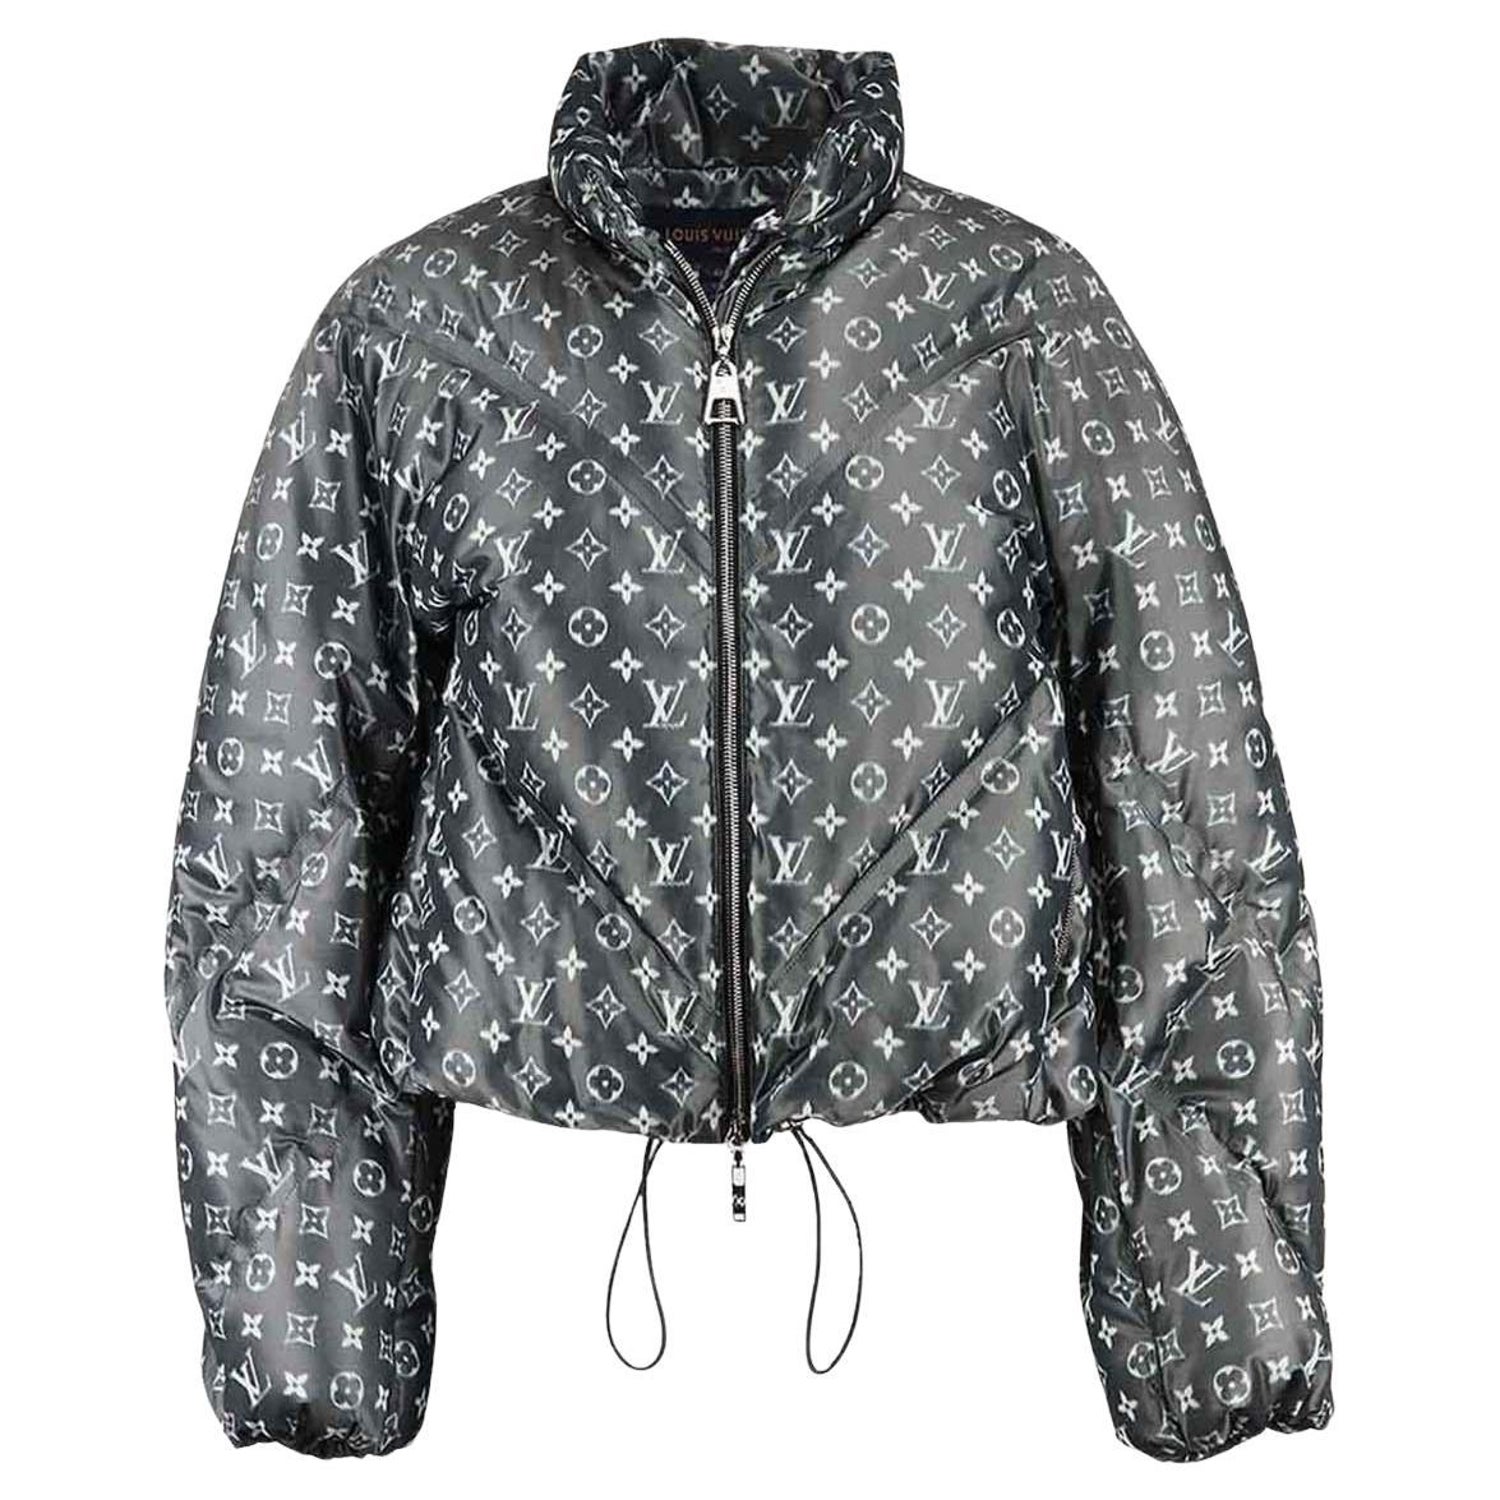 Cozy zipper jacket with Louis Vuitton inspired LV Monograms